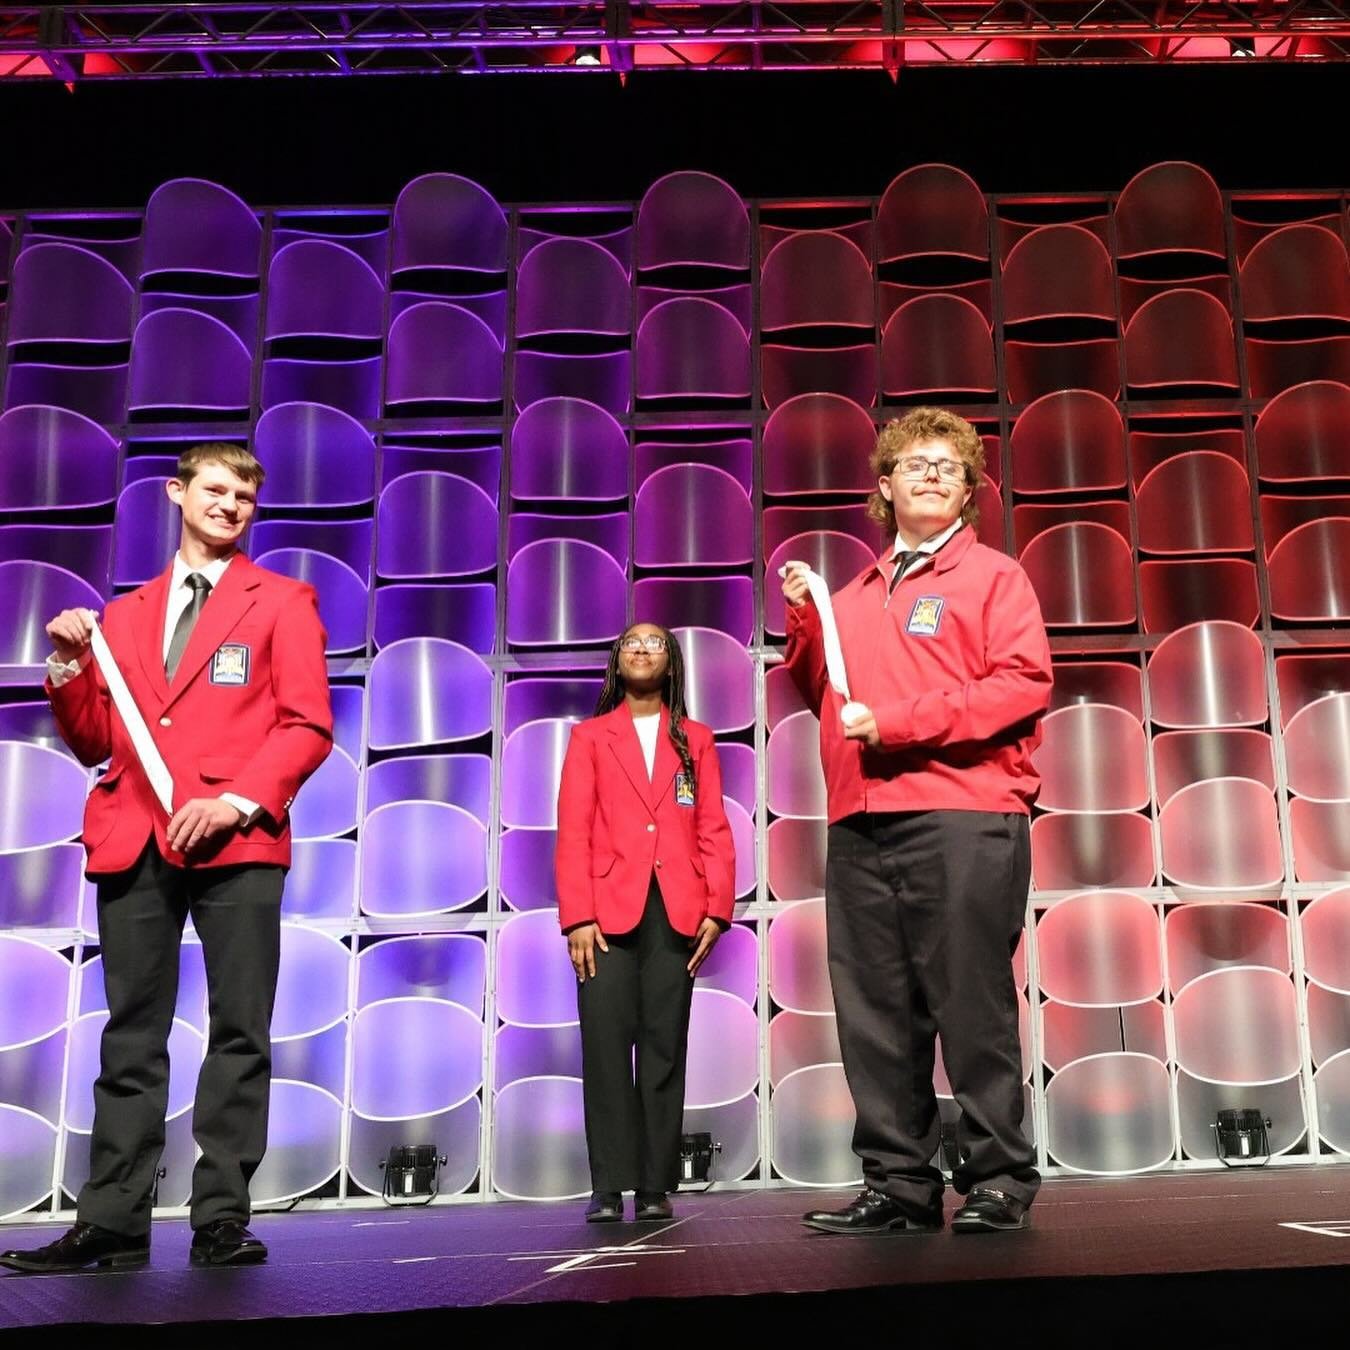 Congratulations to the Service Career students who placed at the recent State SkillsUSA contest!

First Place Winners:
Preston Laverty - Grounds Maintenance
Mia Reaves - Low-Speed Buffing
Adam Vazquez - Standard Riding Mower

Second Place Winners:
Au